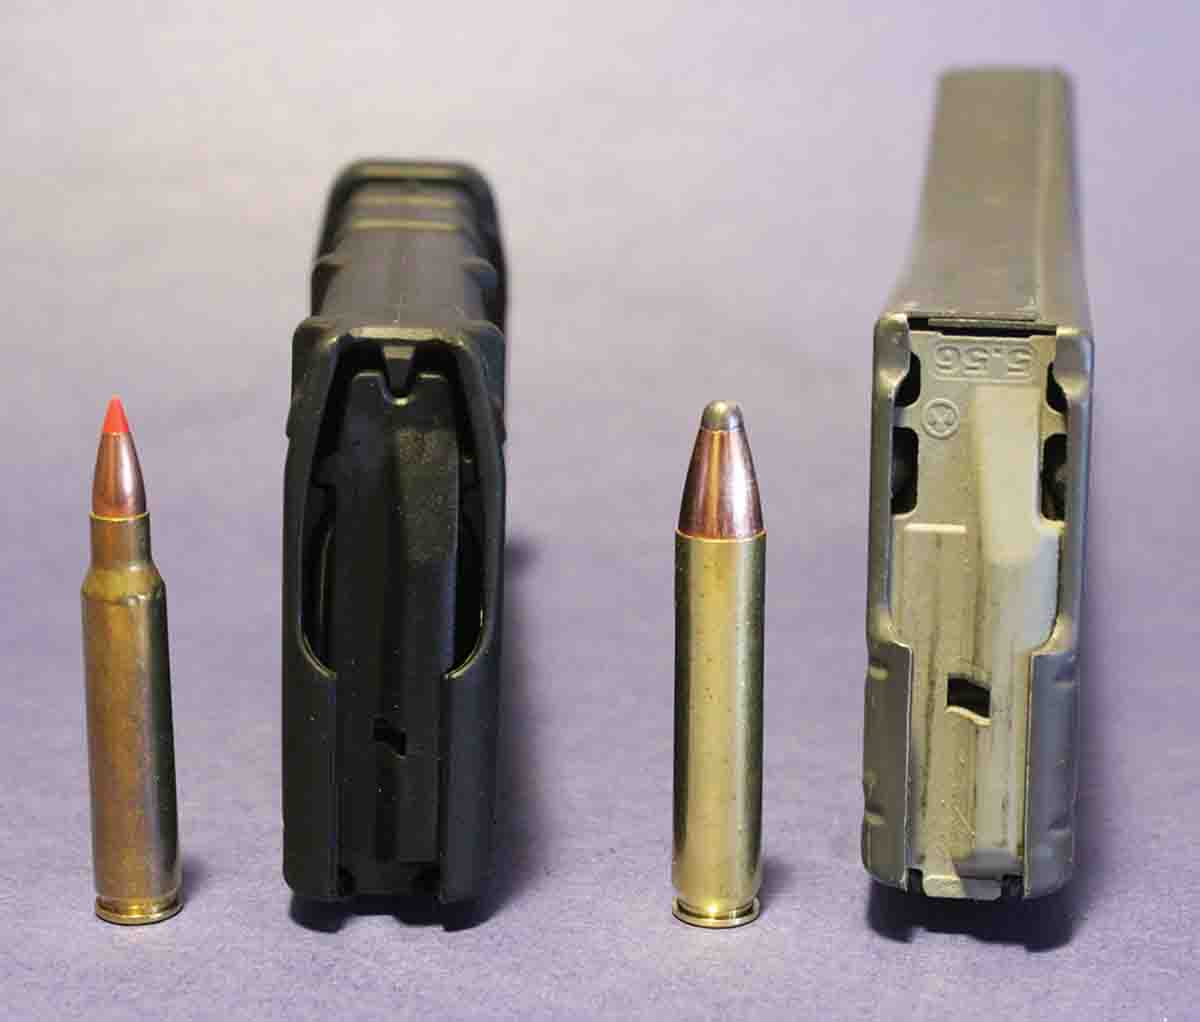 The .350 Legend (right) is a necked-up and slightly shortened .223 Remington (left). It will feed from many AR-15 magazines – but not all, including the magazine on the left, due to its narrow “slots” for .224-diameter bullets.